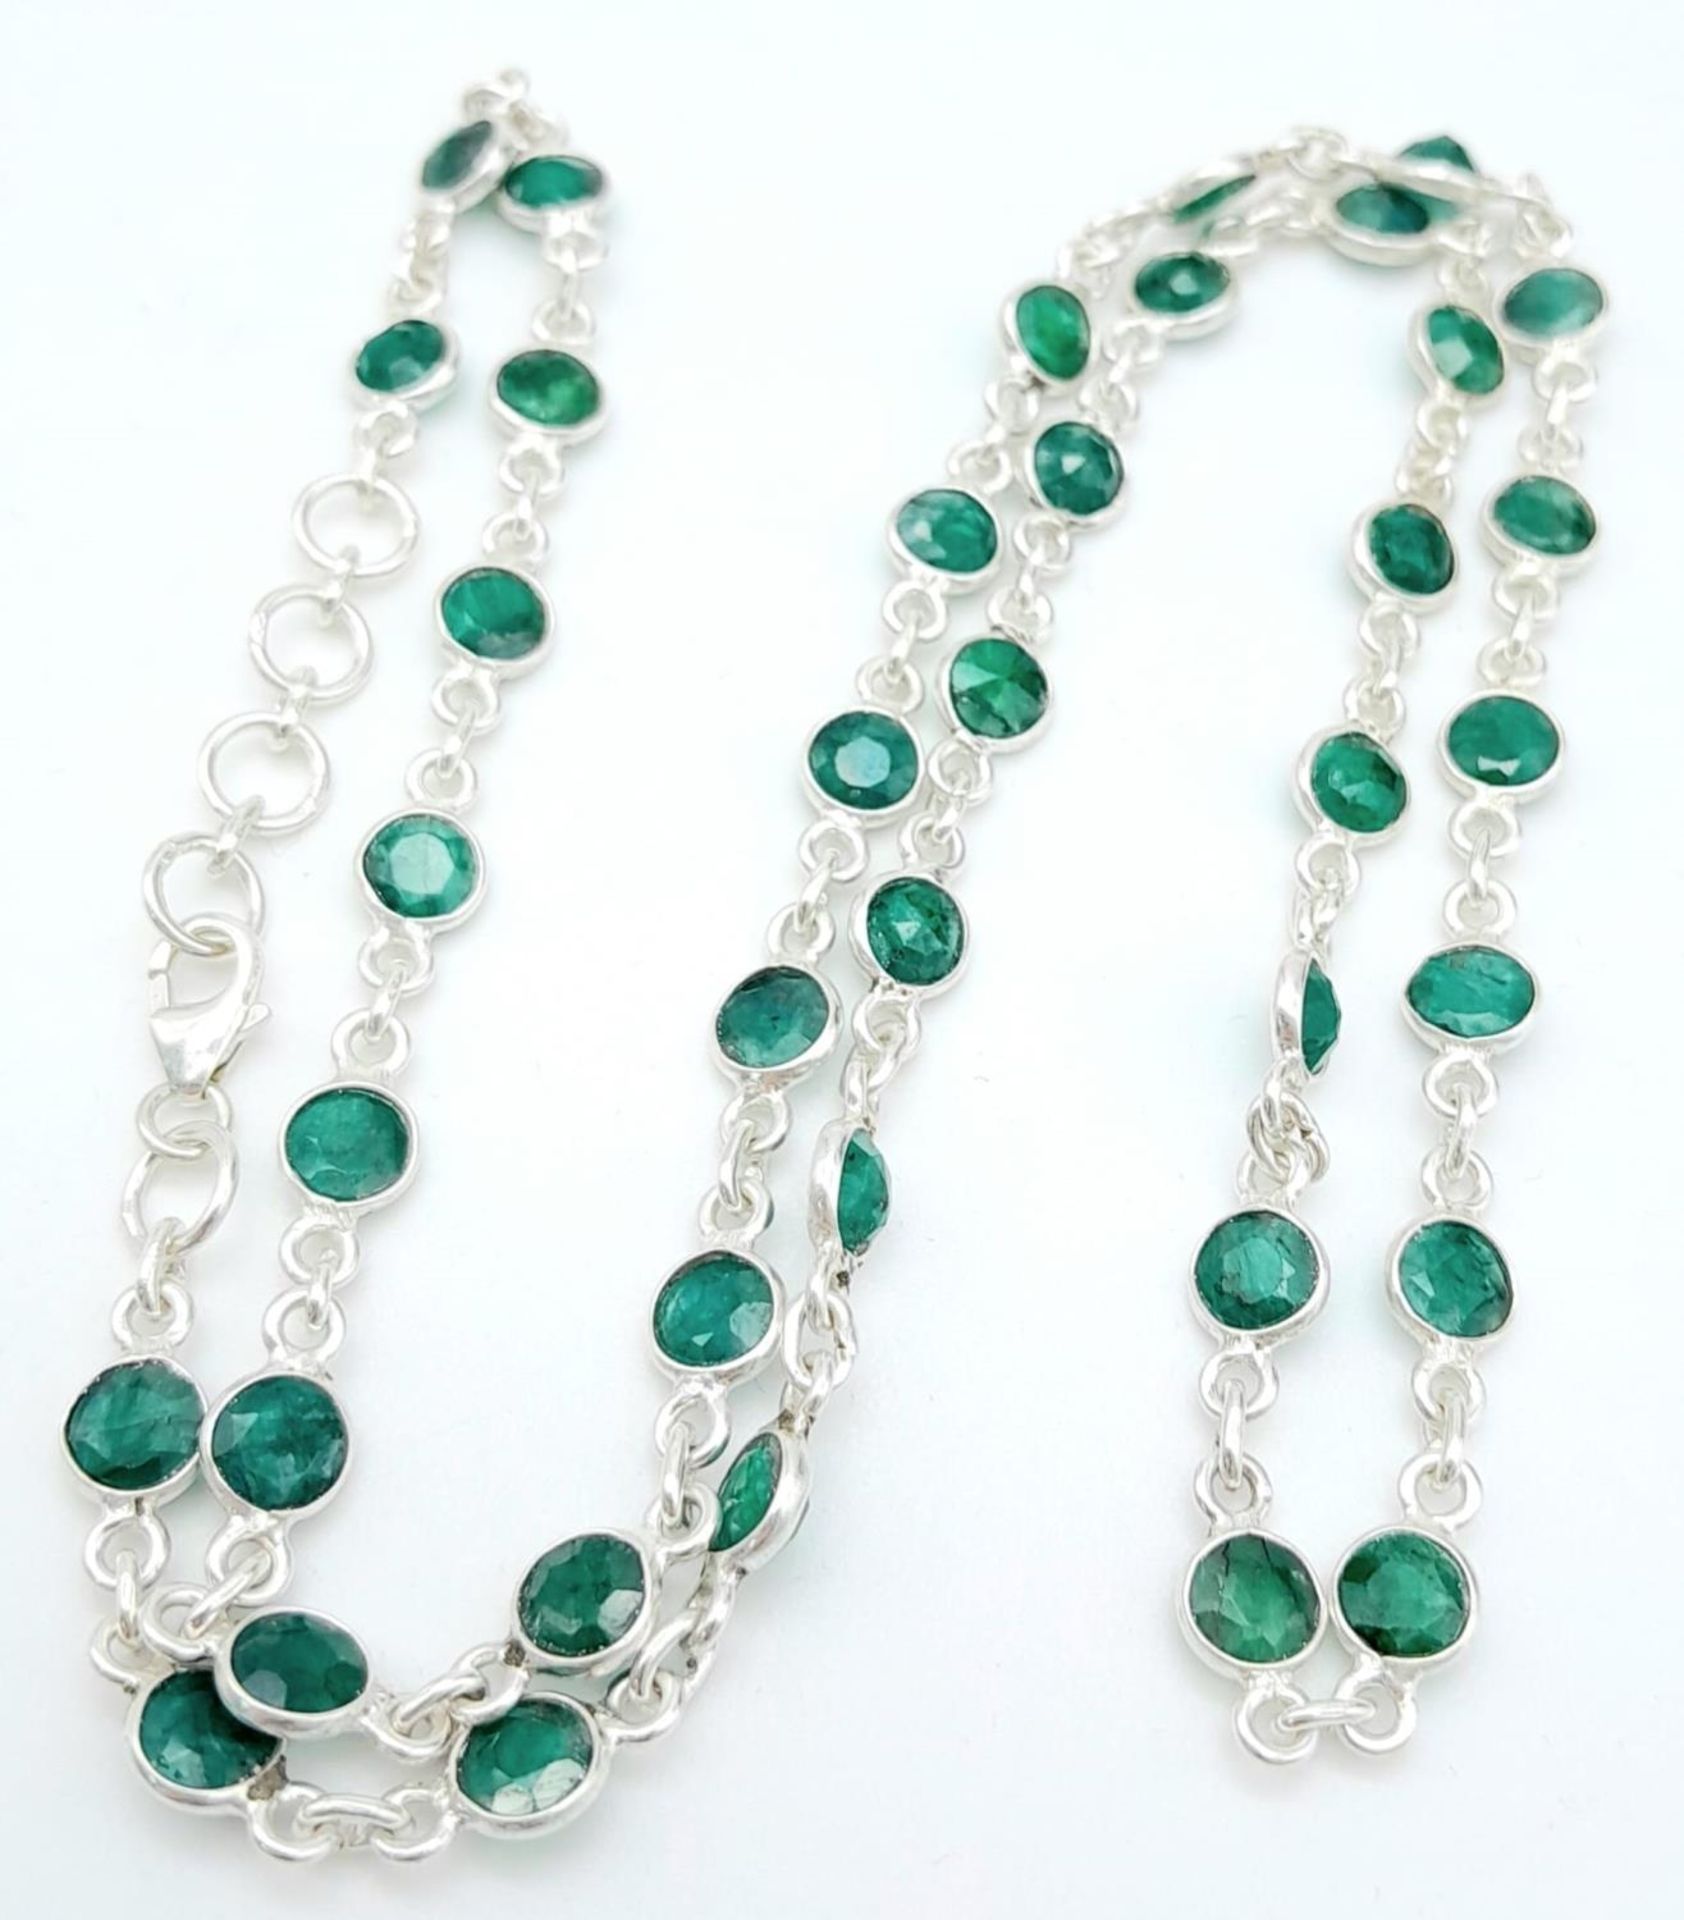 An Emerald Gemstone Chain Necklace set in 925 Silver. 54cm length. Ref: 1105